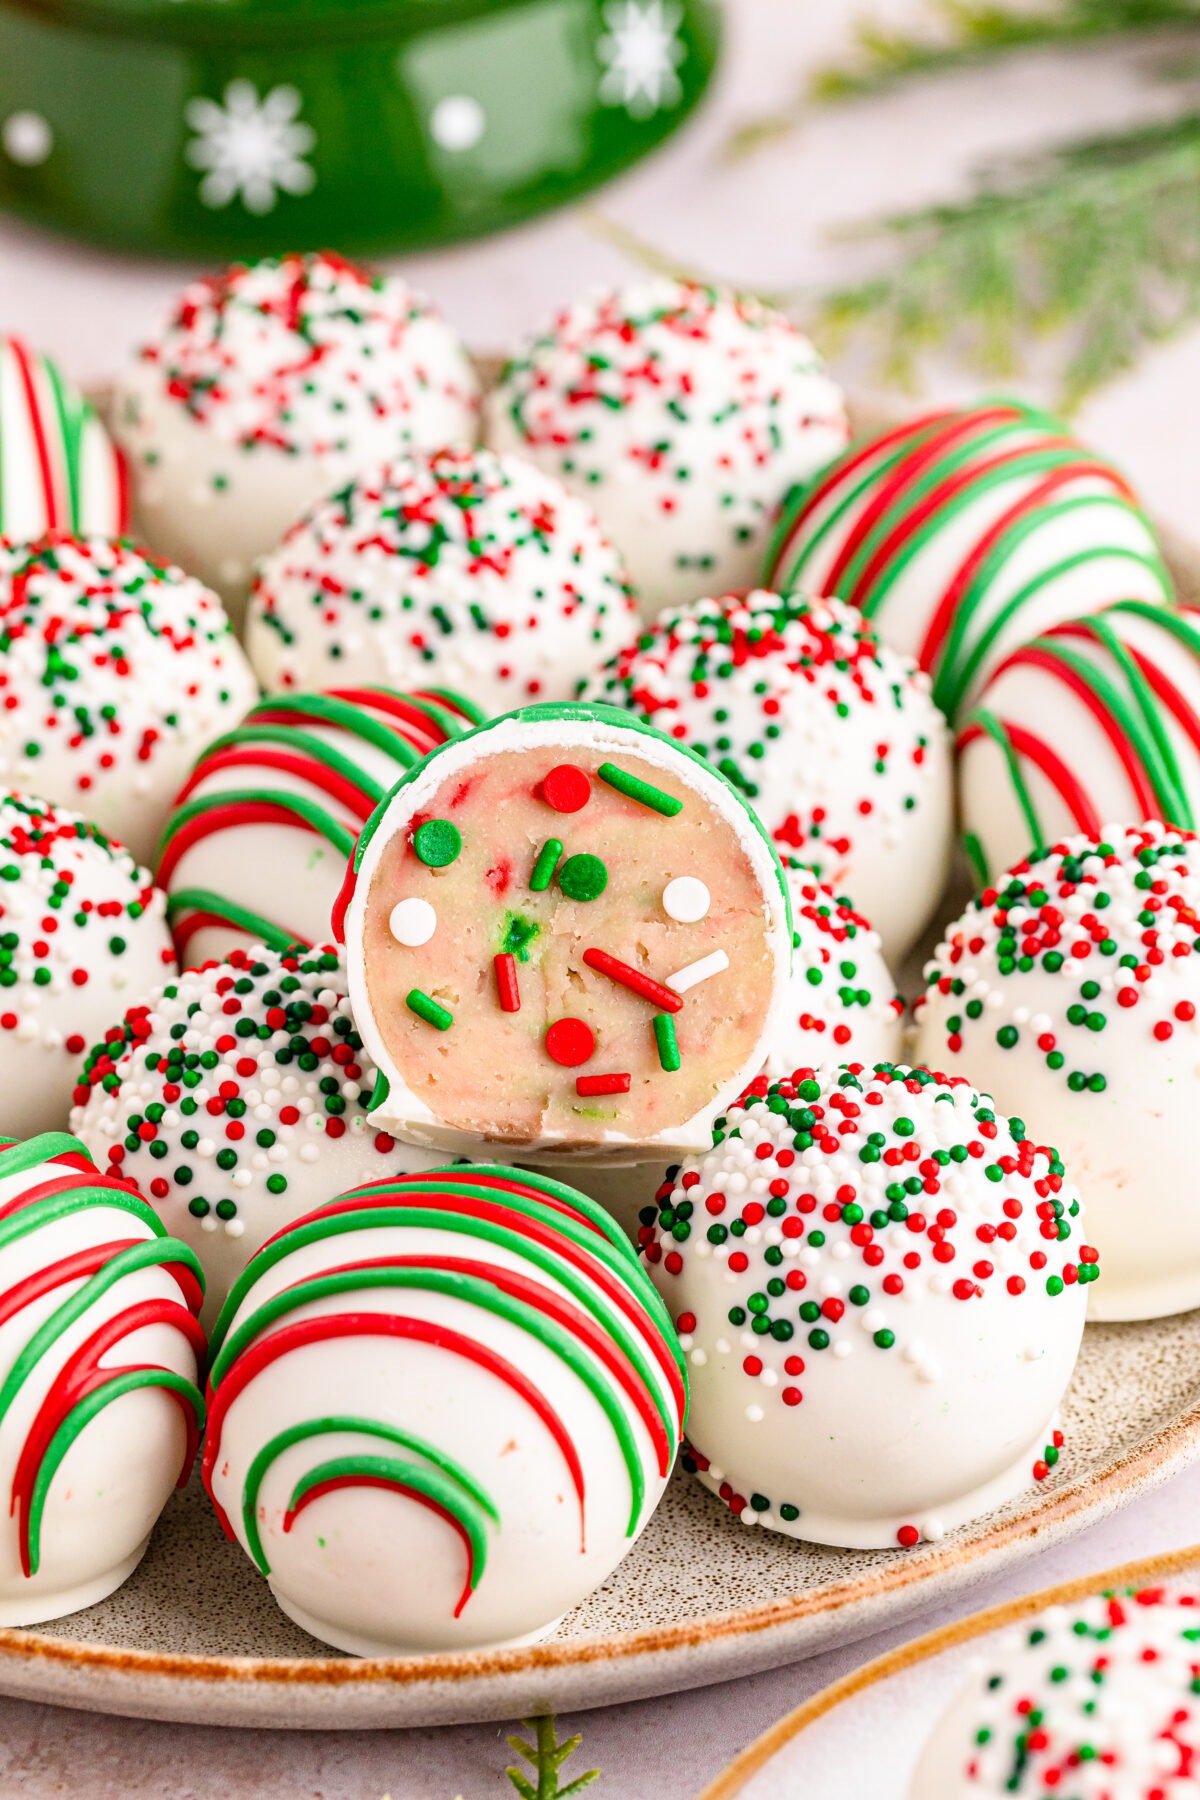 Get in the holiday spirit with these delicious, no-bake Christmas sugar cookie balls that are just perfect for any festive event or party!